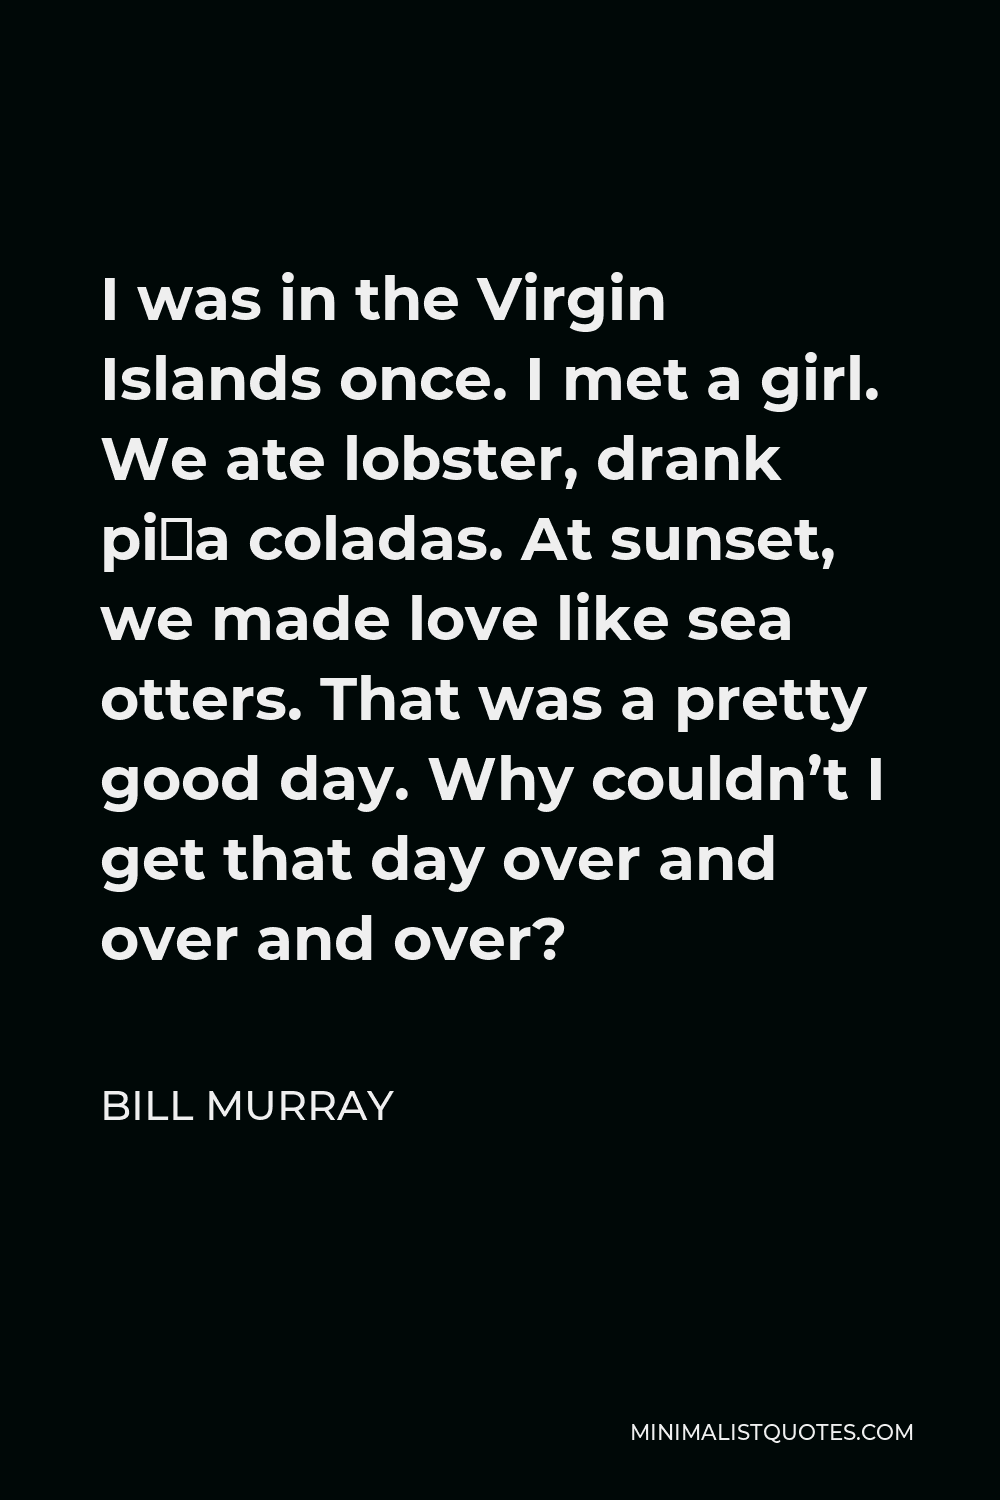 Bill Murray Quote - I was in the Virgin Islands once. I met a girl. We ate lobster, drank piña coladas. At sunset, we made love like sea otters. That was a pretty good day. Why couldn’t I get that day over and over and over?